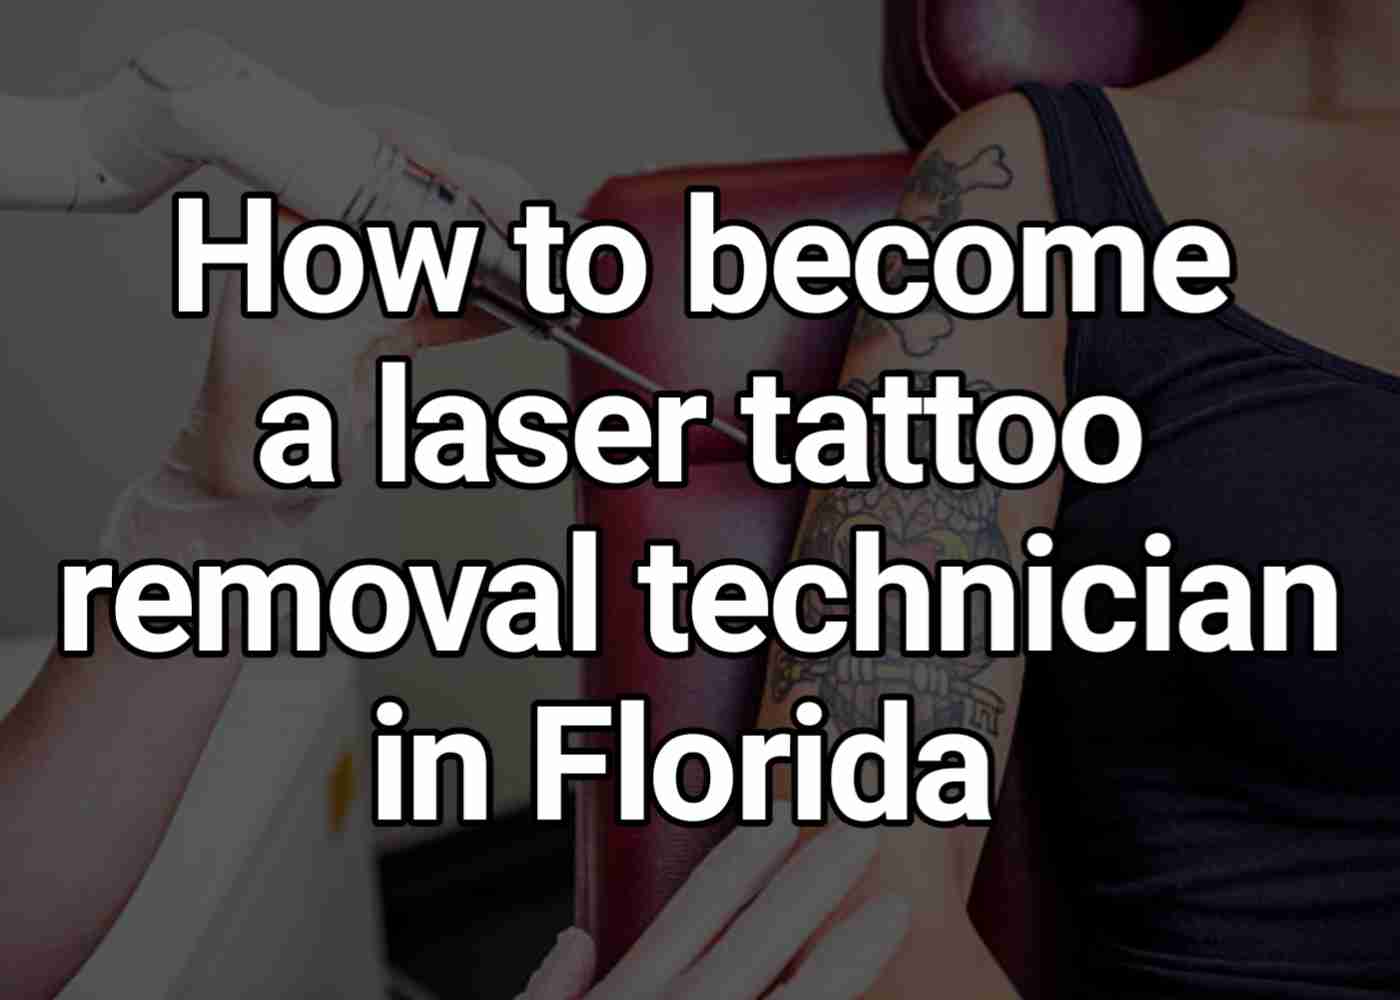 how to become a laser tattoo removal technician in Florida